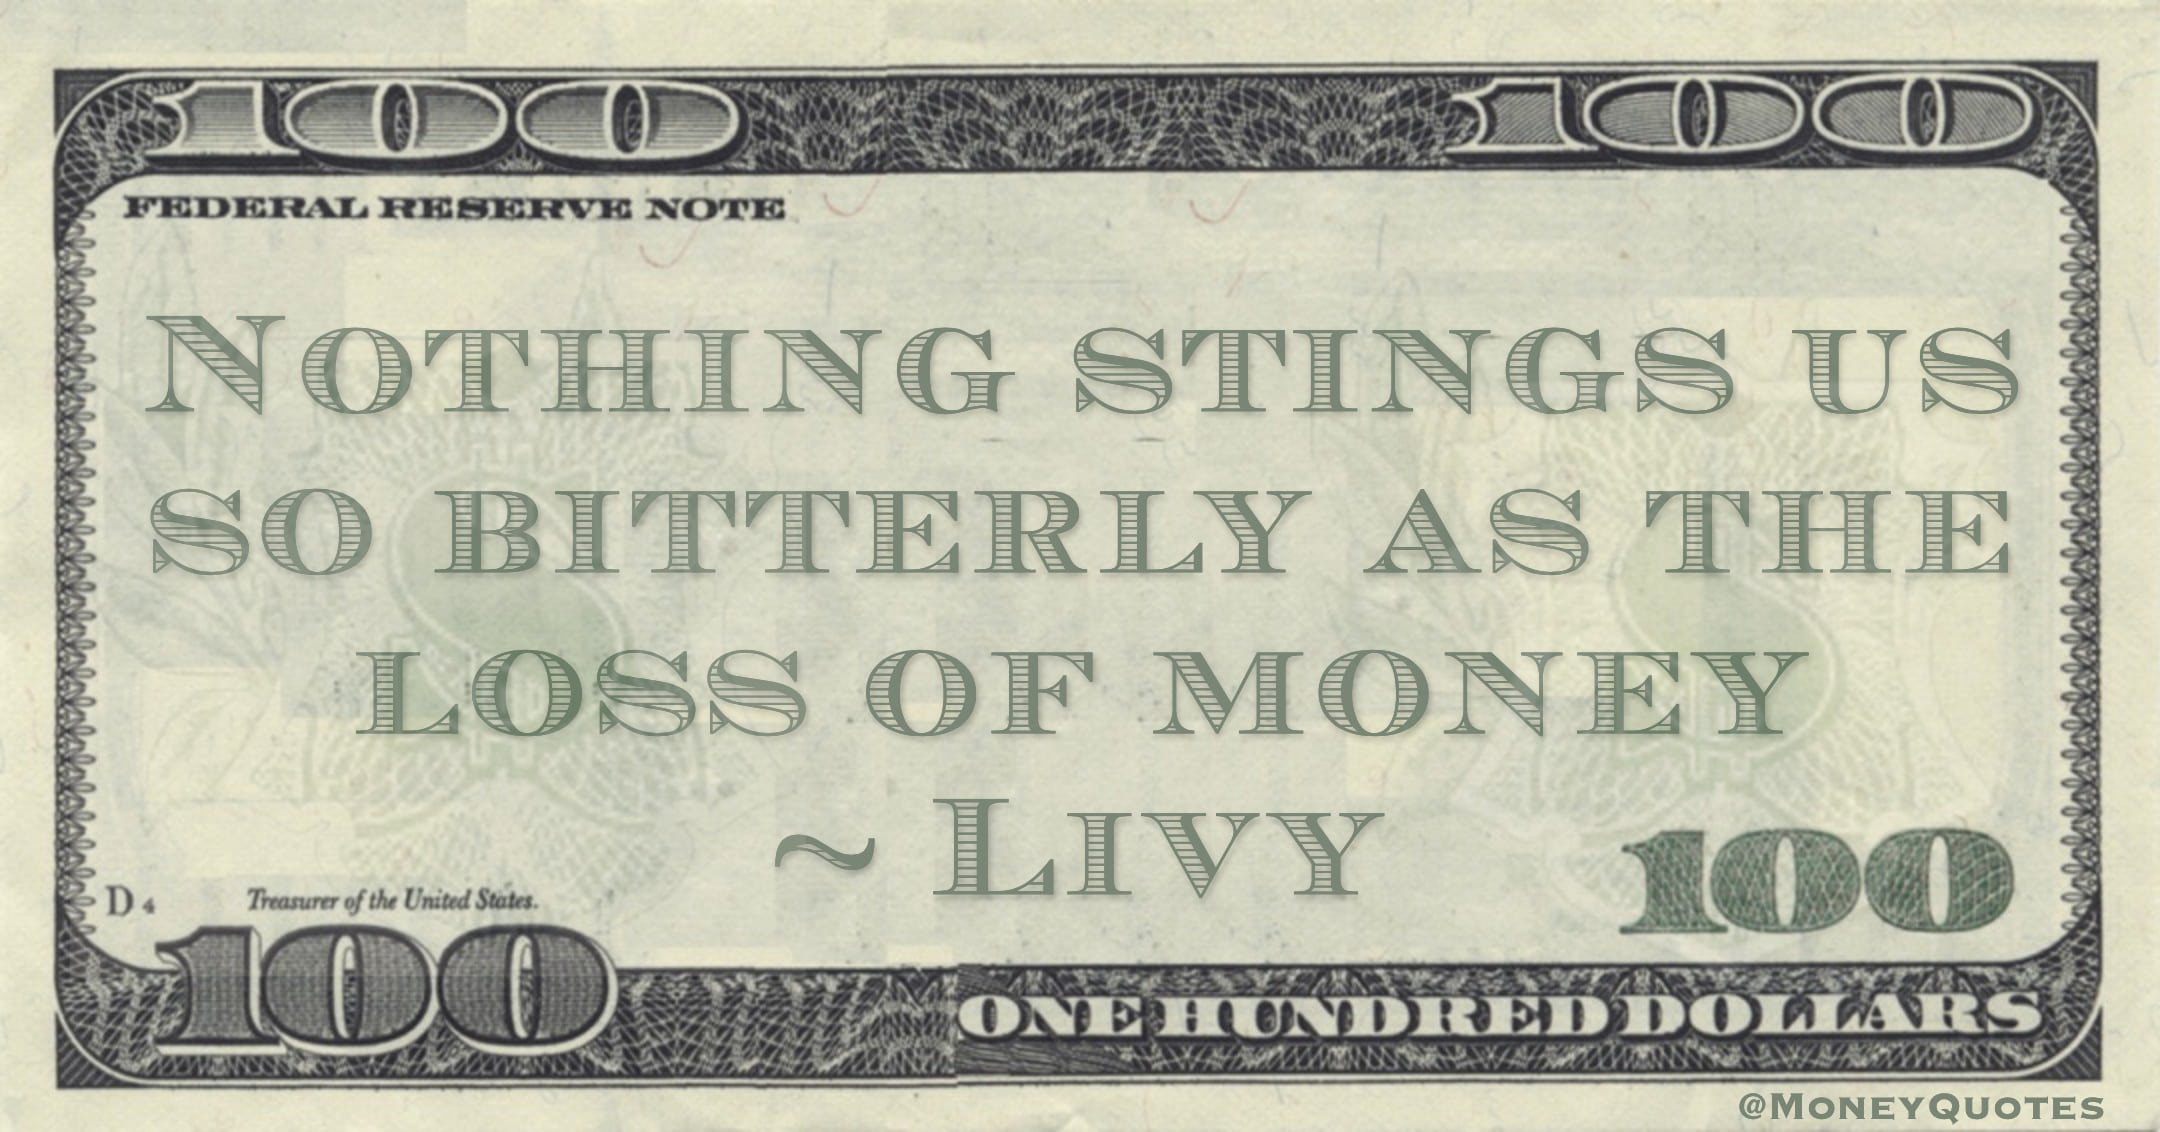 Nothing stings us so bitterly as the loss of money Quote